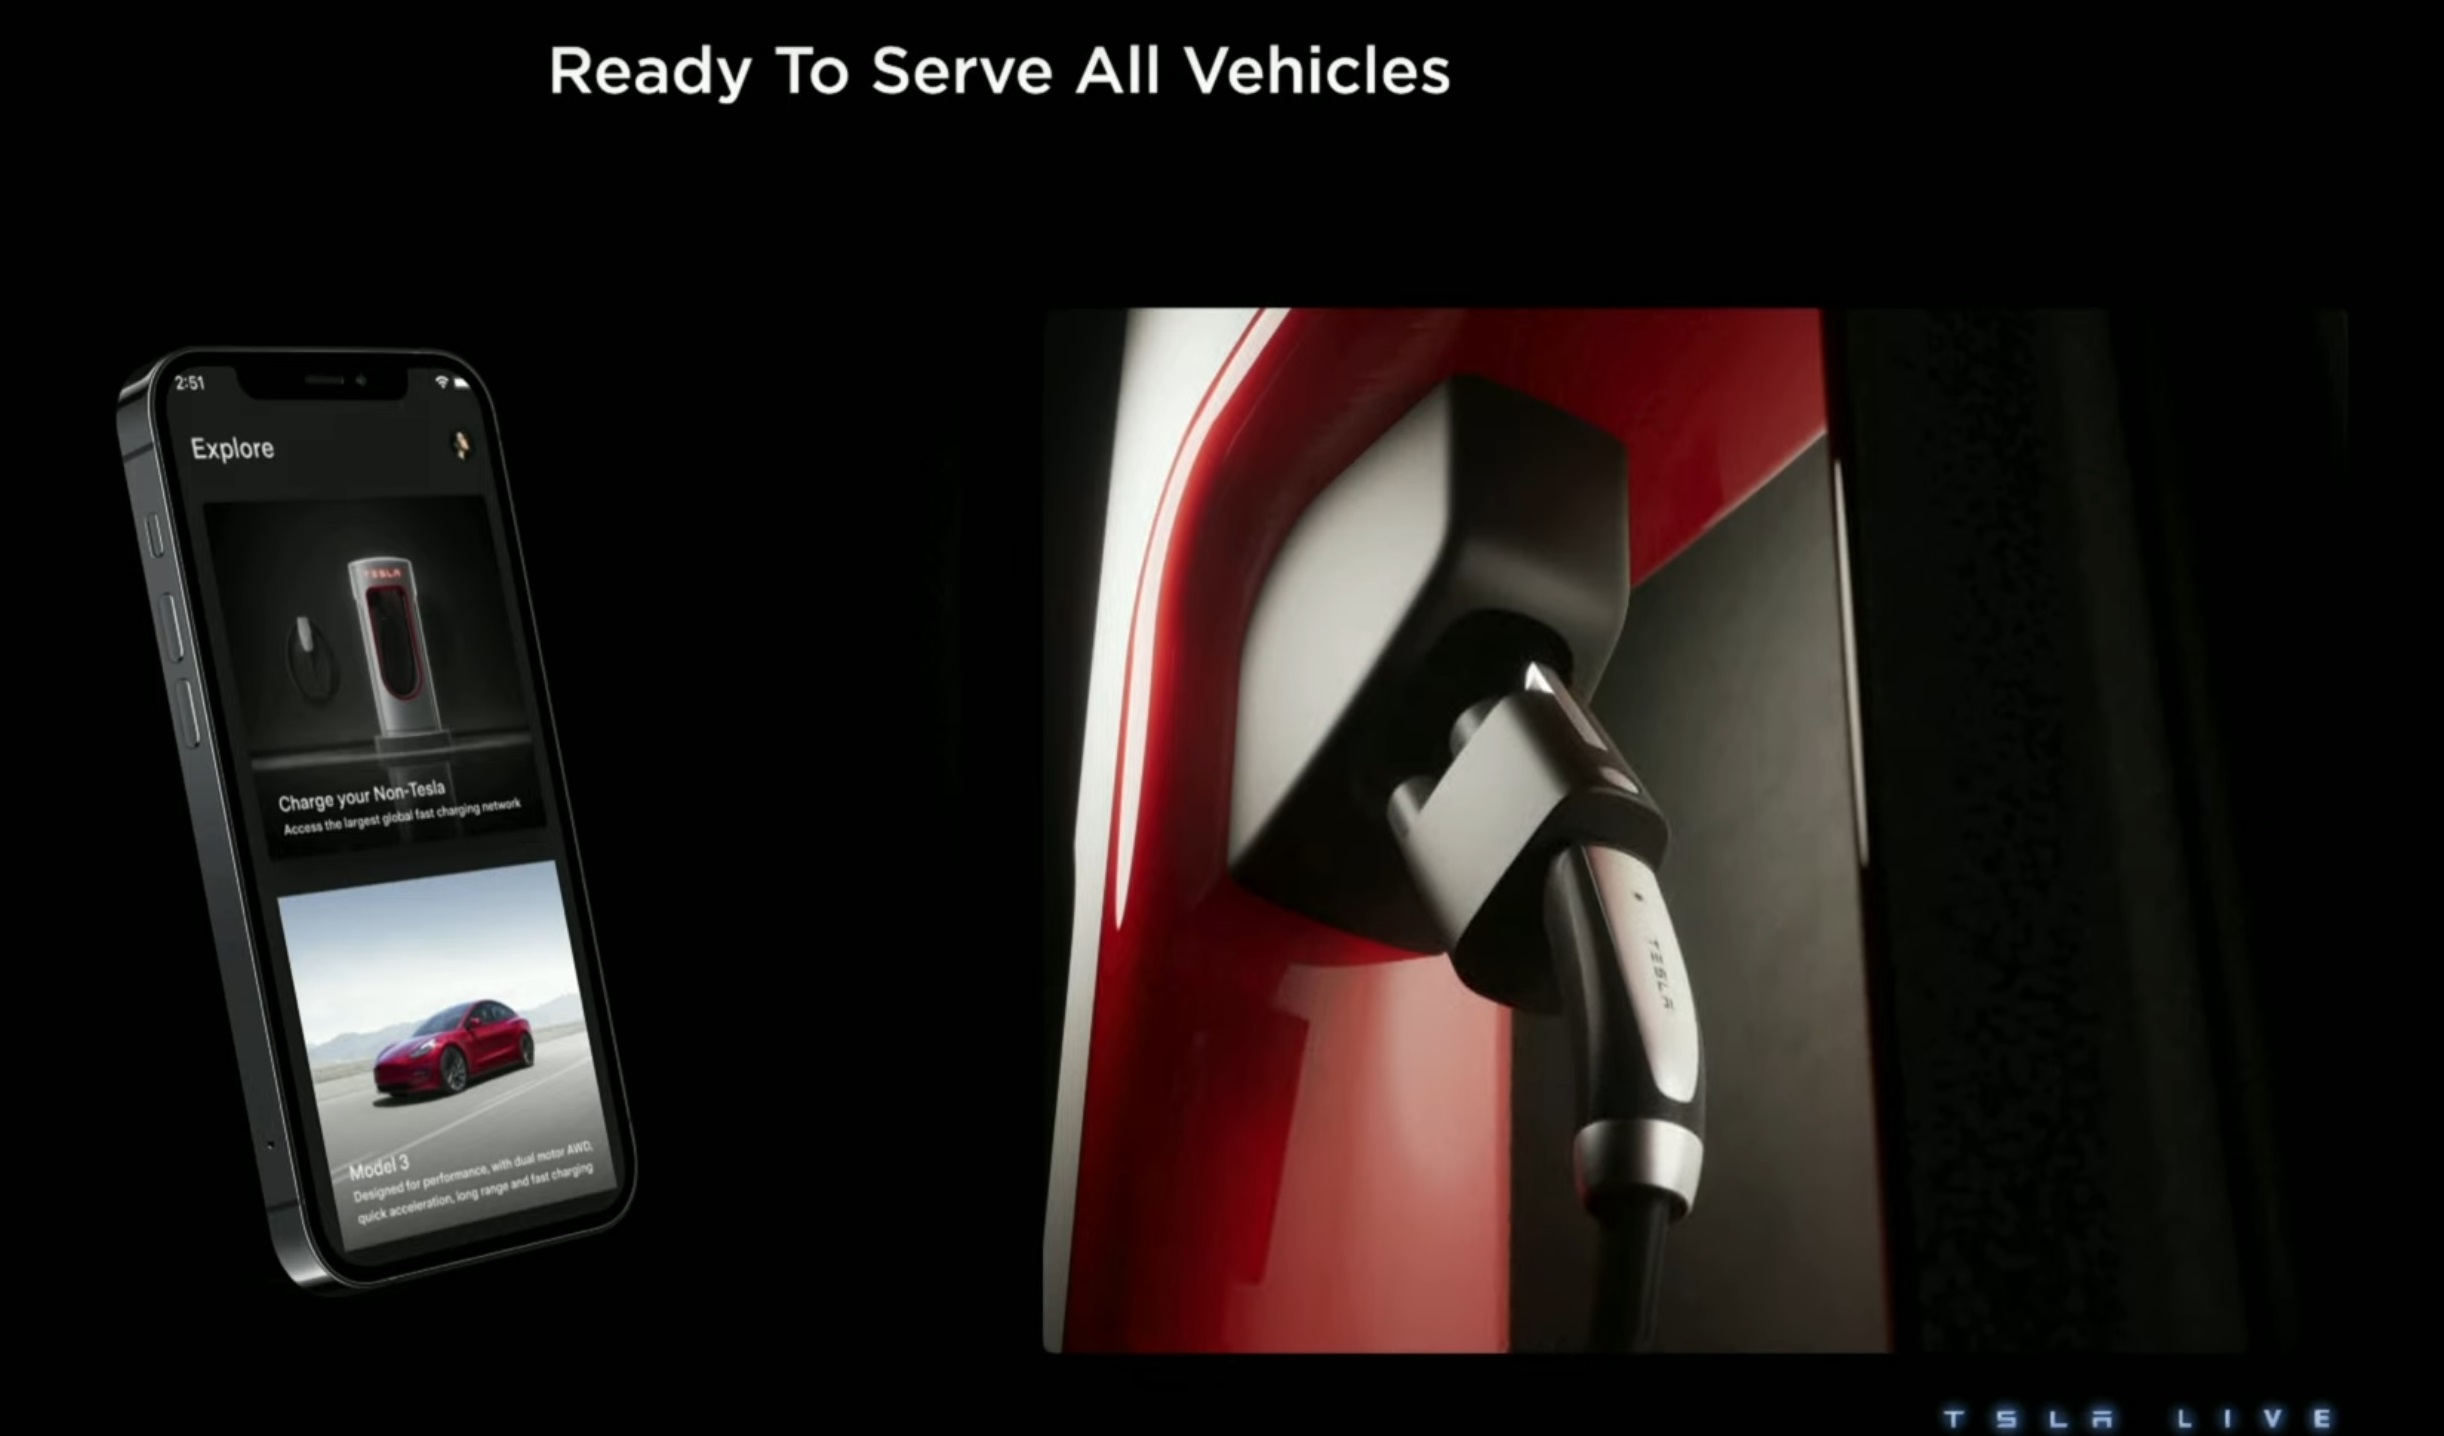 Tesla Opens First Superchargers To Non-Tesla EVs In US